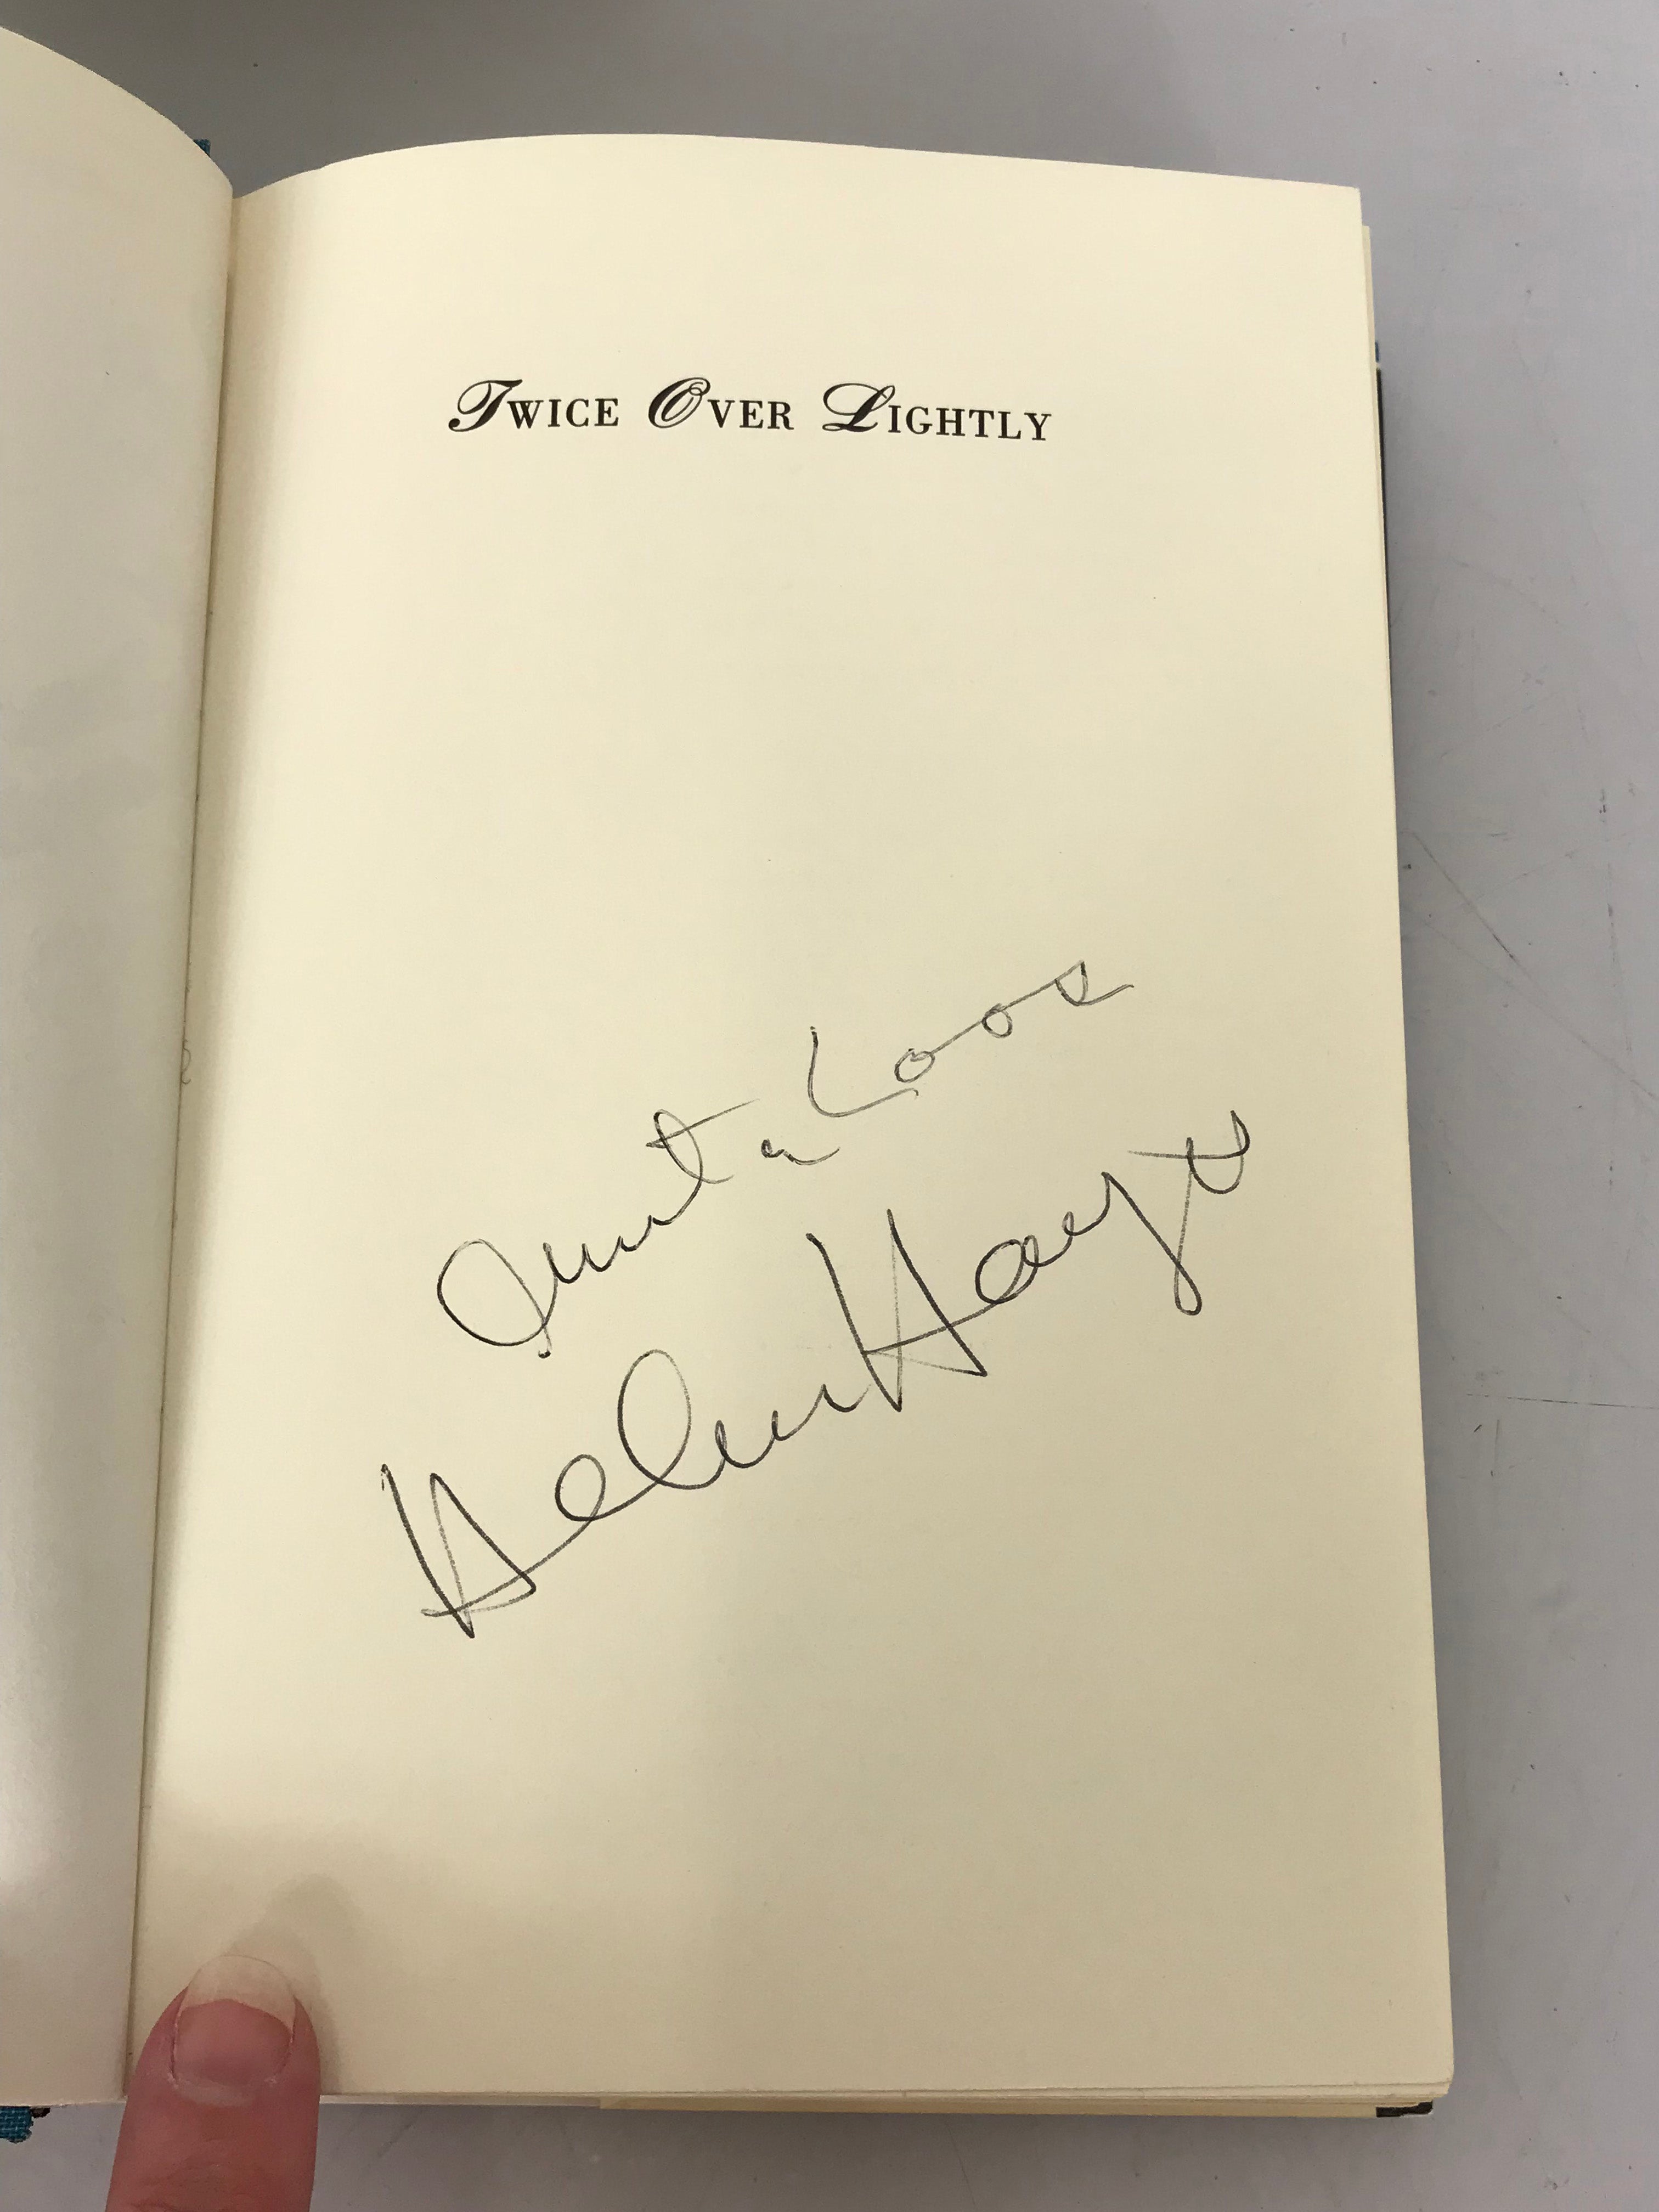 Helen Hayes Collector's Lot of 3 Signed First Editions 1972 - 1988 HC DJ